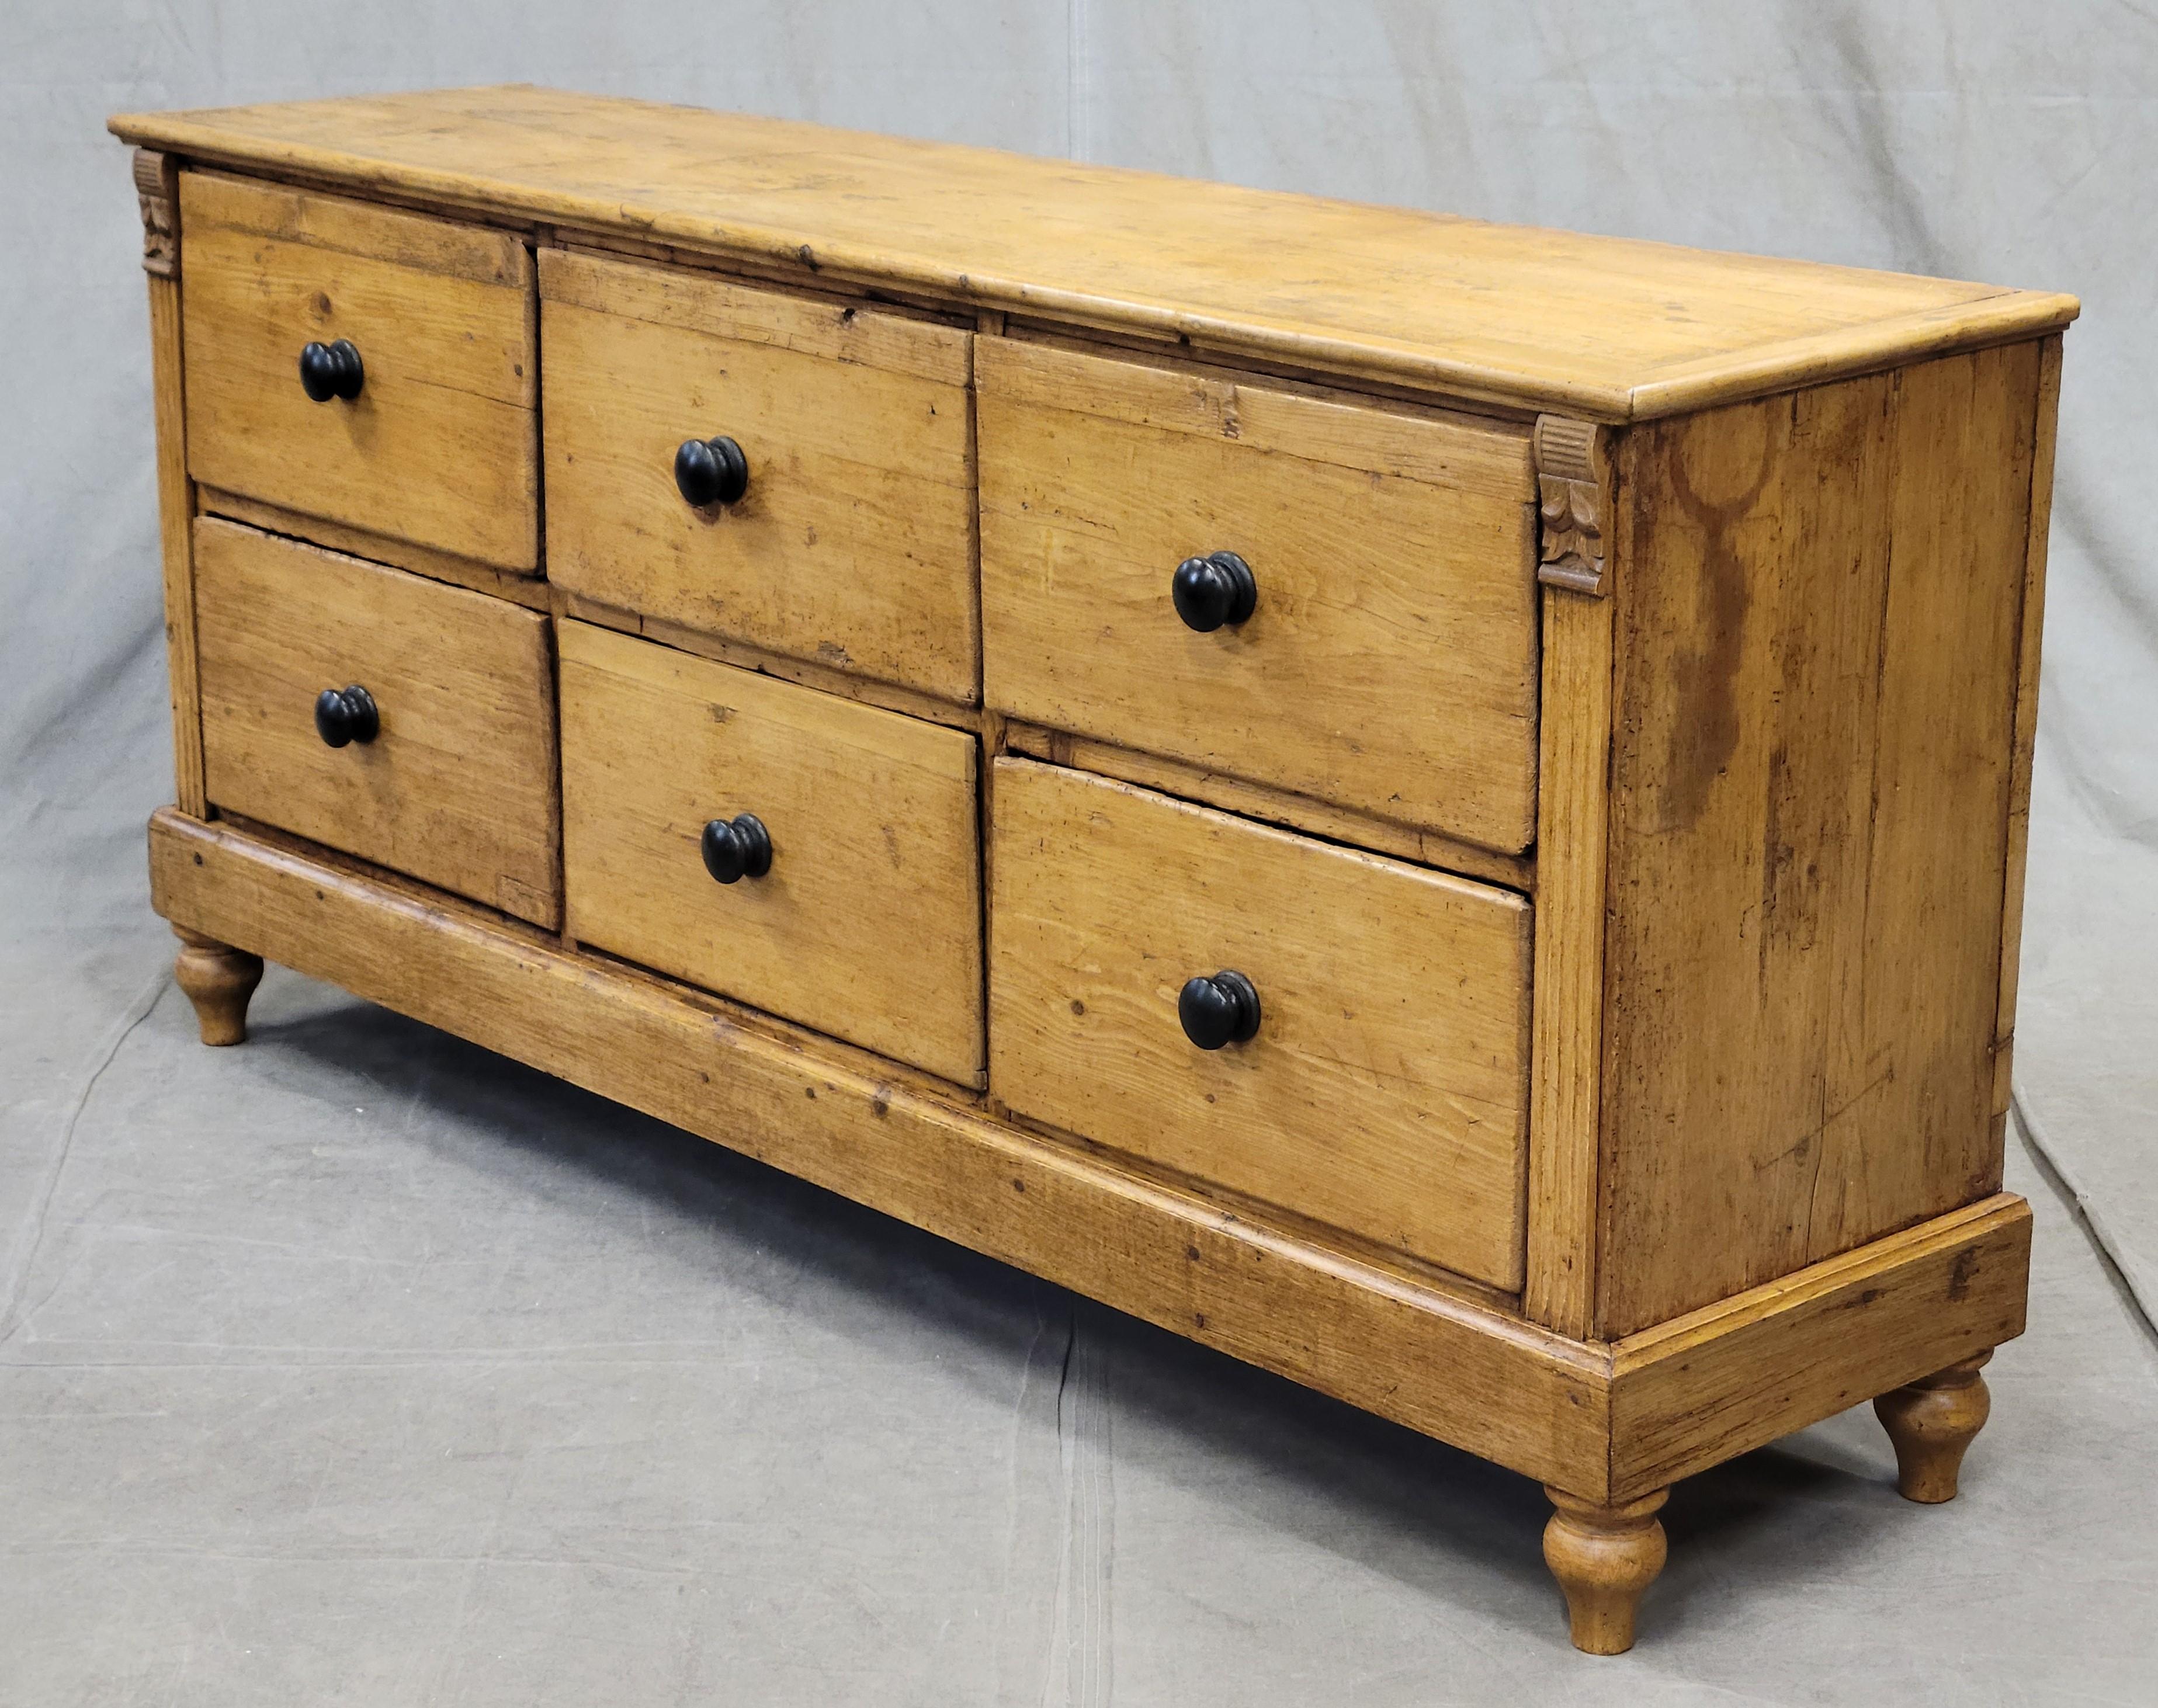 A gorgeous antique Eastern European rustic pine credenza sideboard apothecary with six drawers which offer a good amount of storage. Note the rustic nature of the pine with old wormholes and imperfections which add to the charm of this piece. Hand